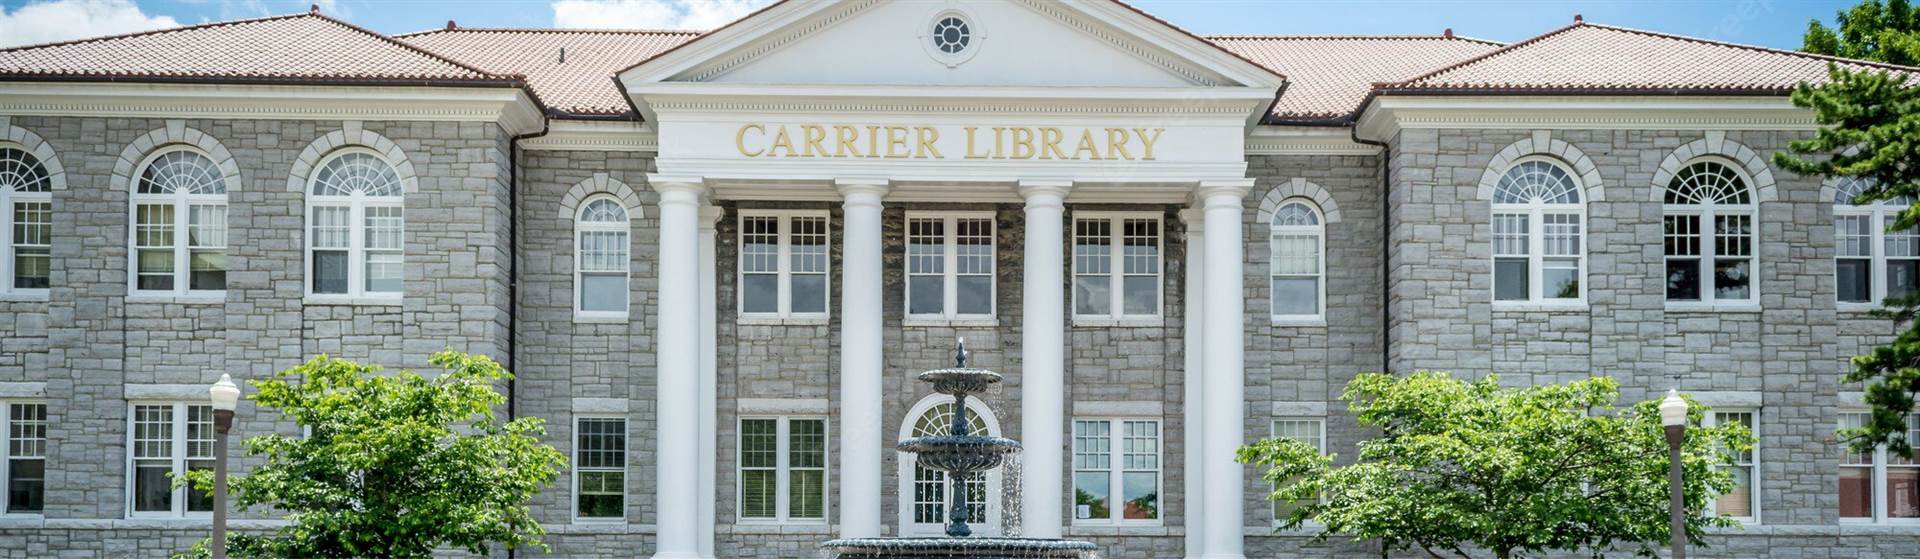 Carrier Library